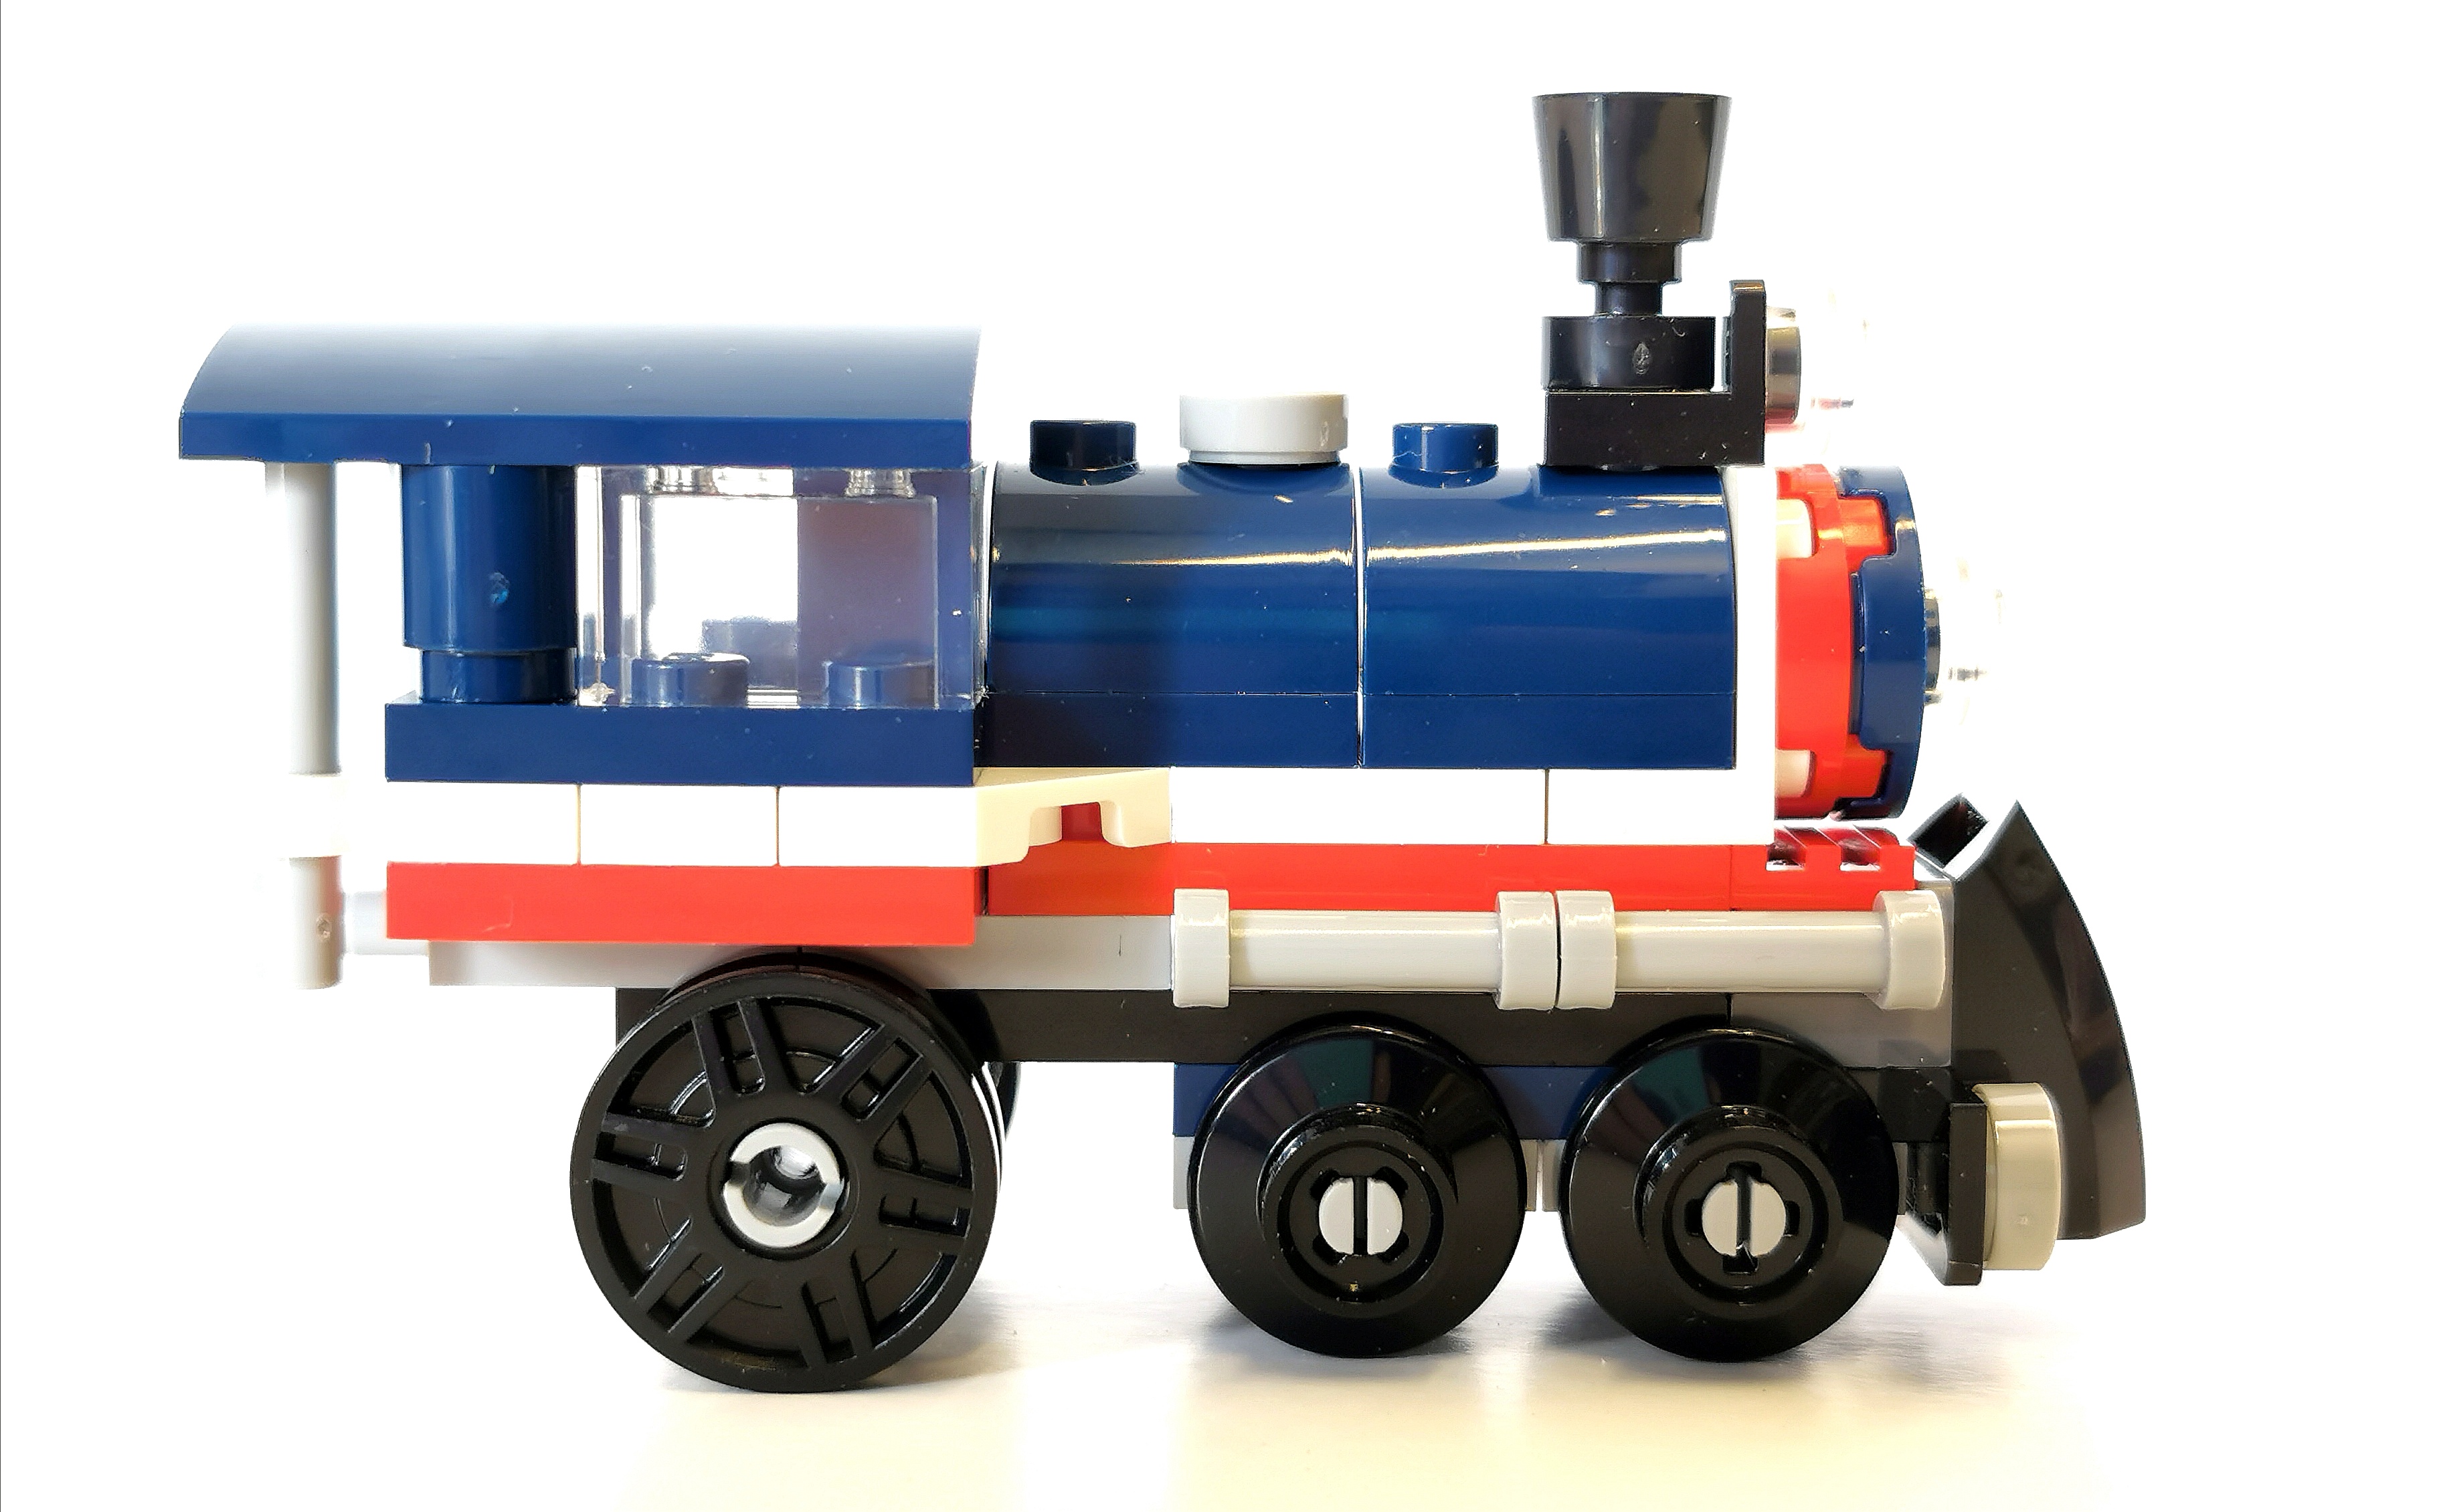 30575 LEGO Train Polybags for sale online